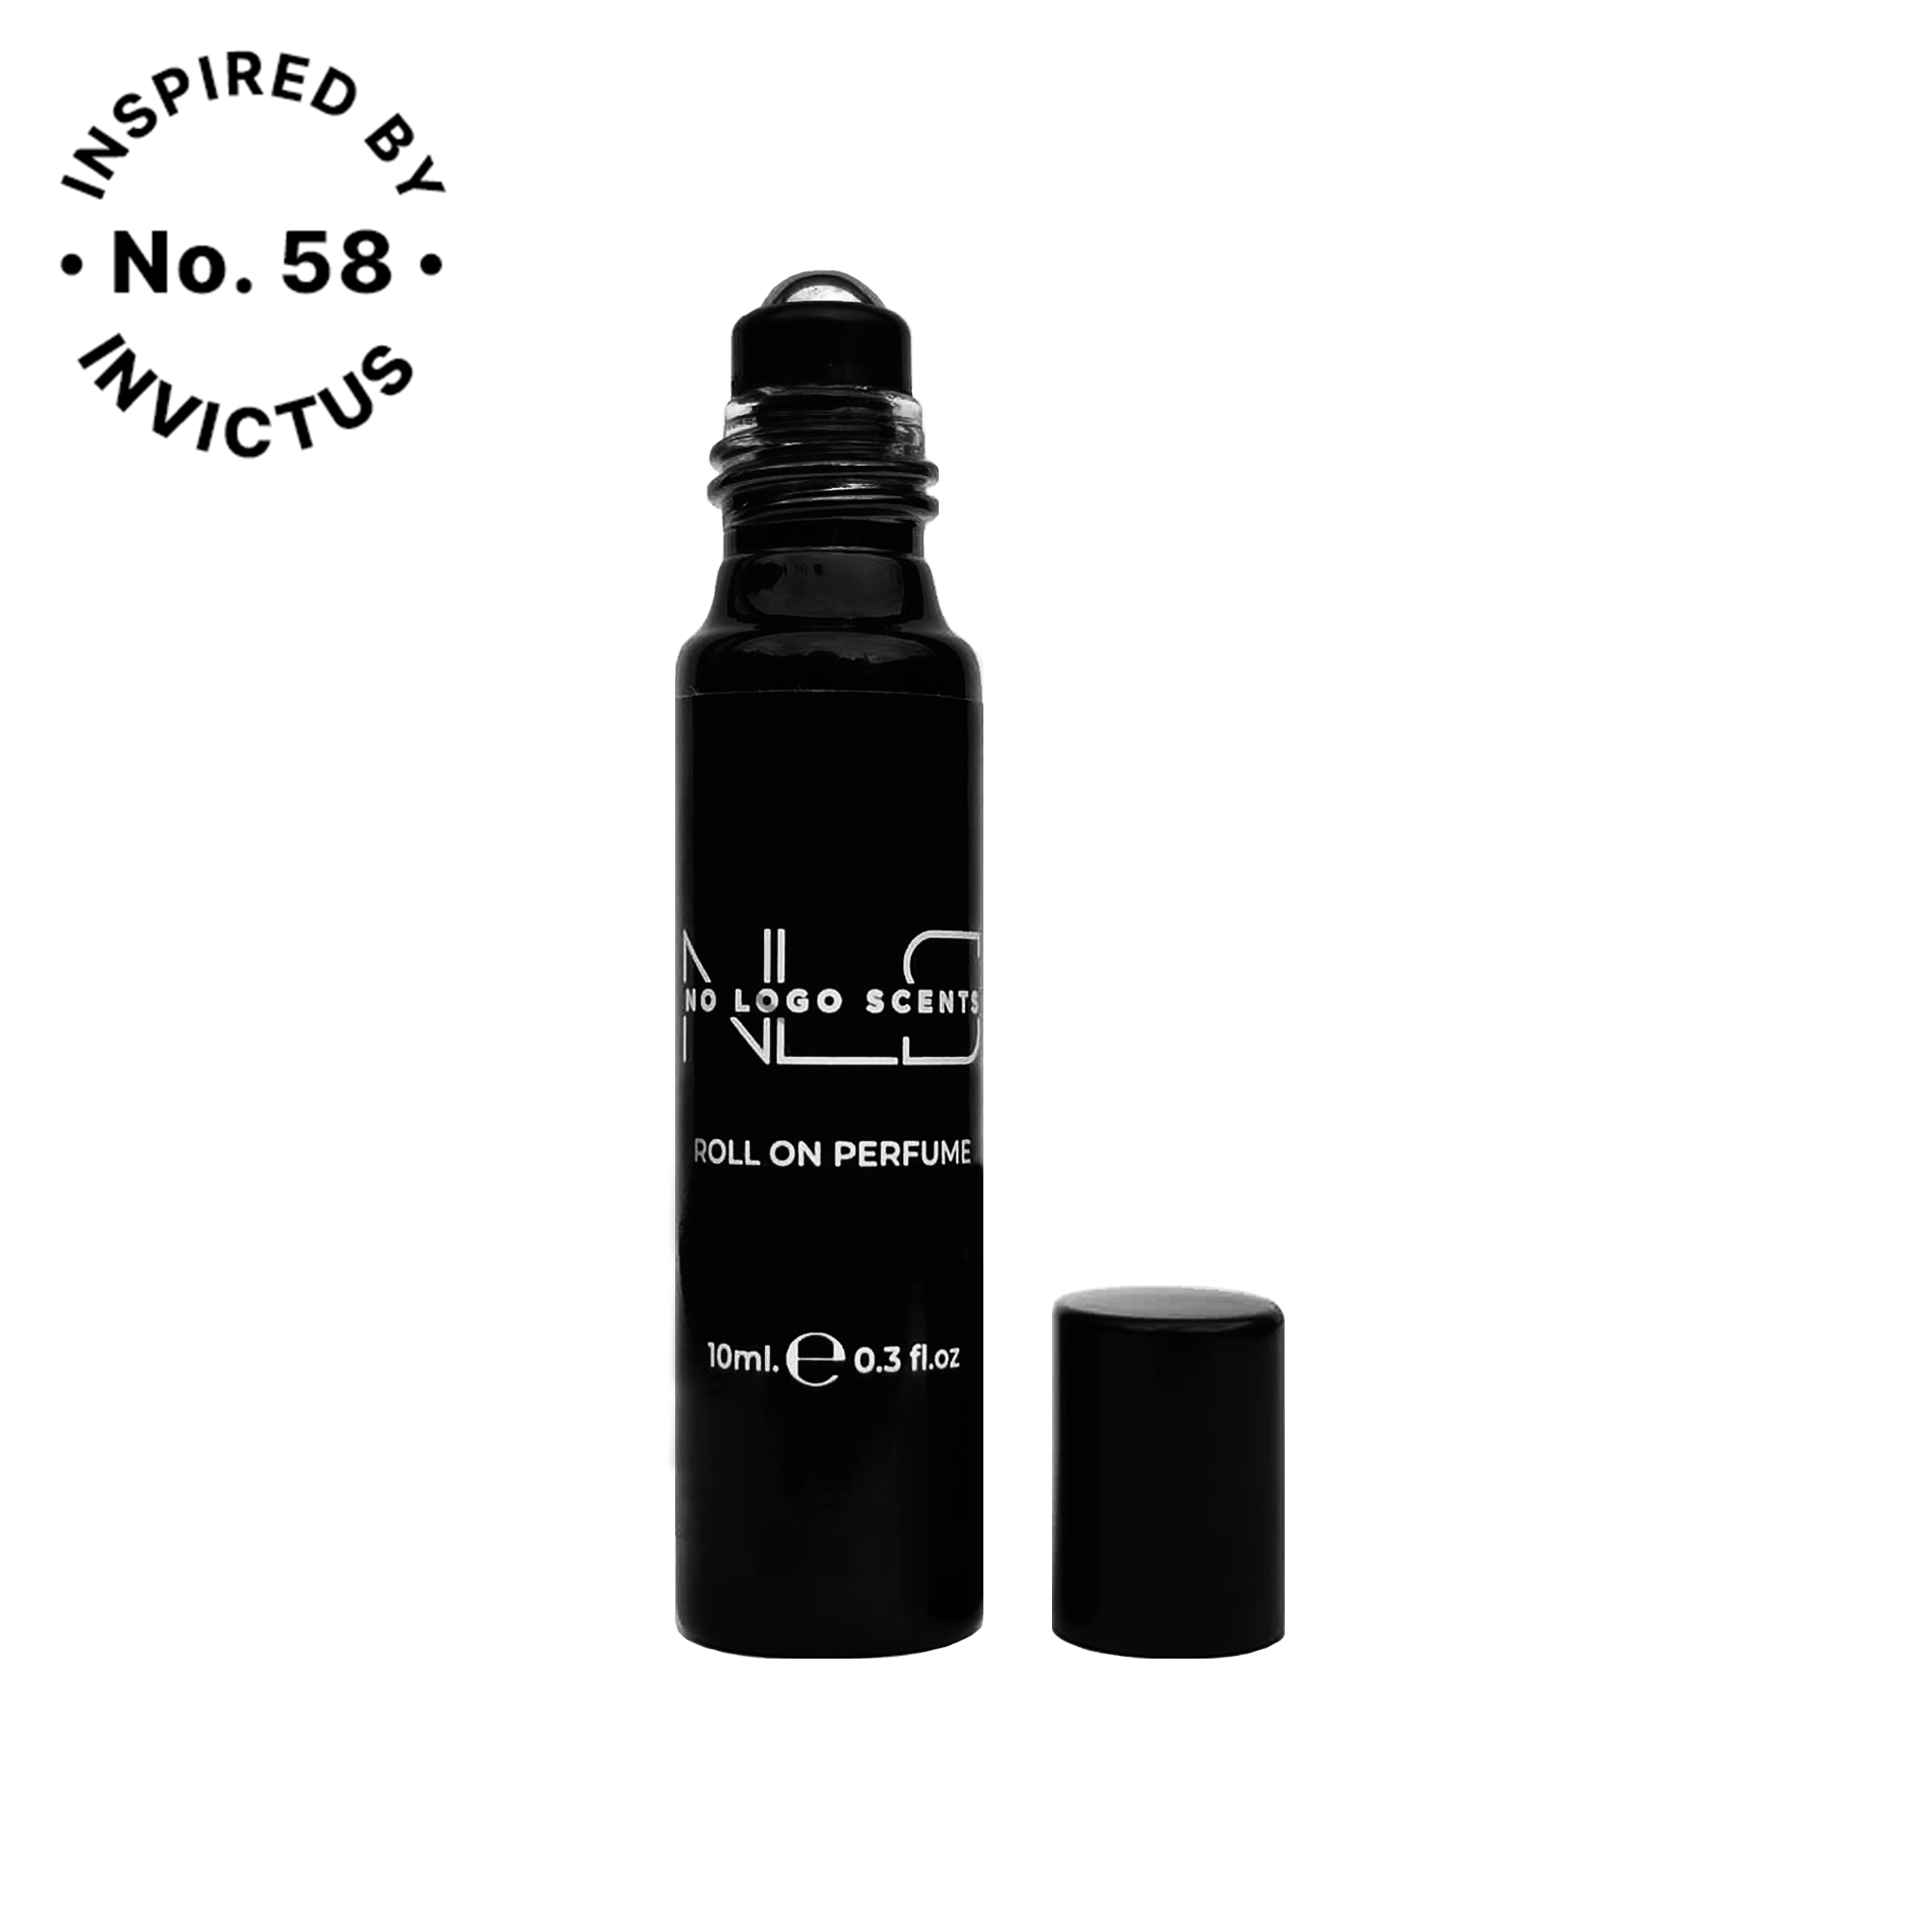 No.58 – INSPIRED BY INVICTUS from category MEN’S ROLL ON PERFUMES - 1